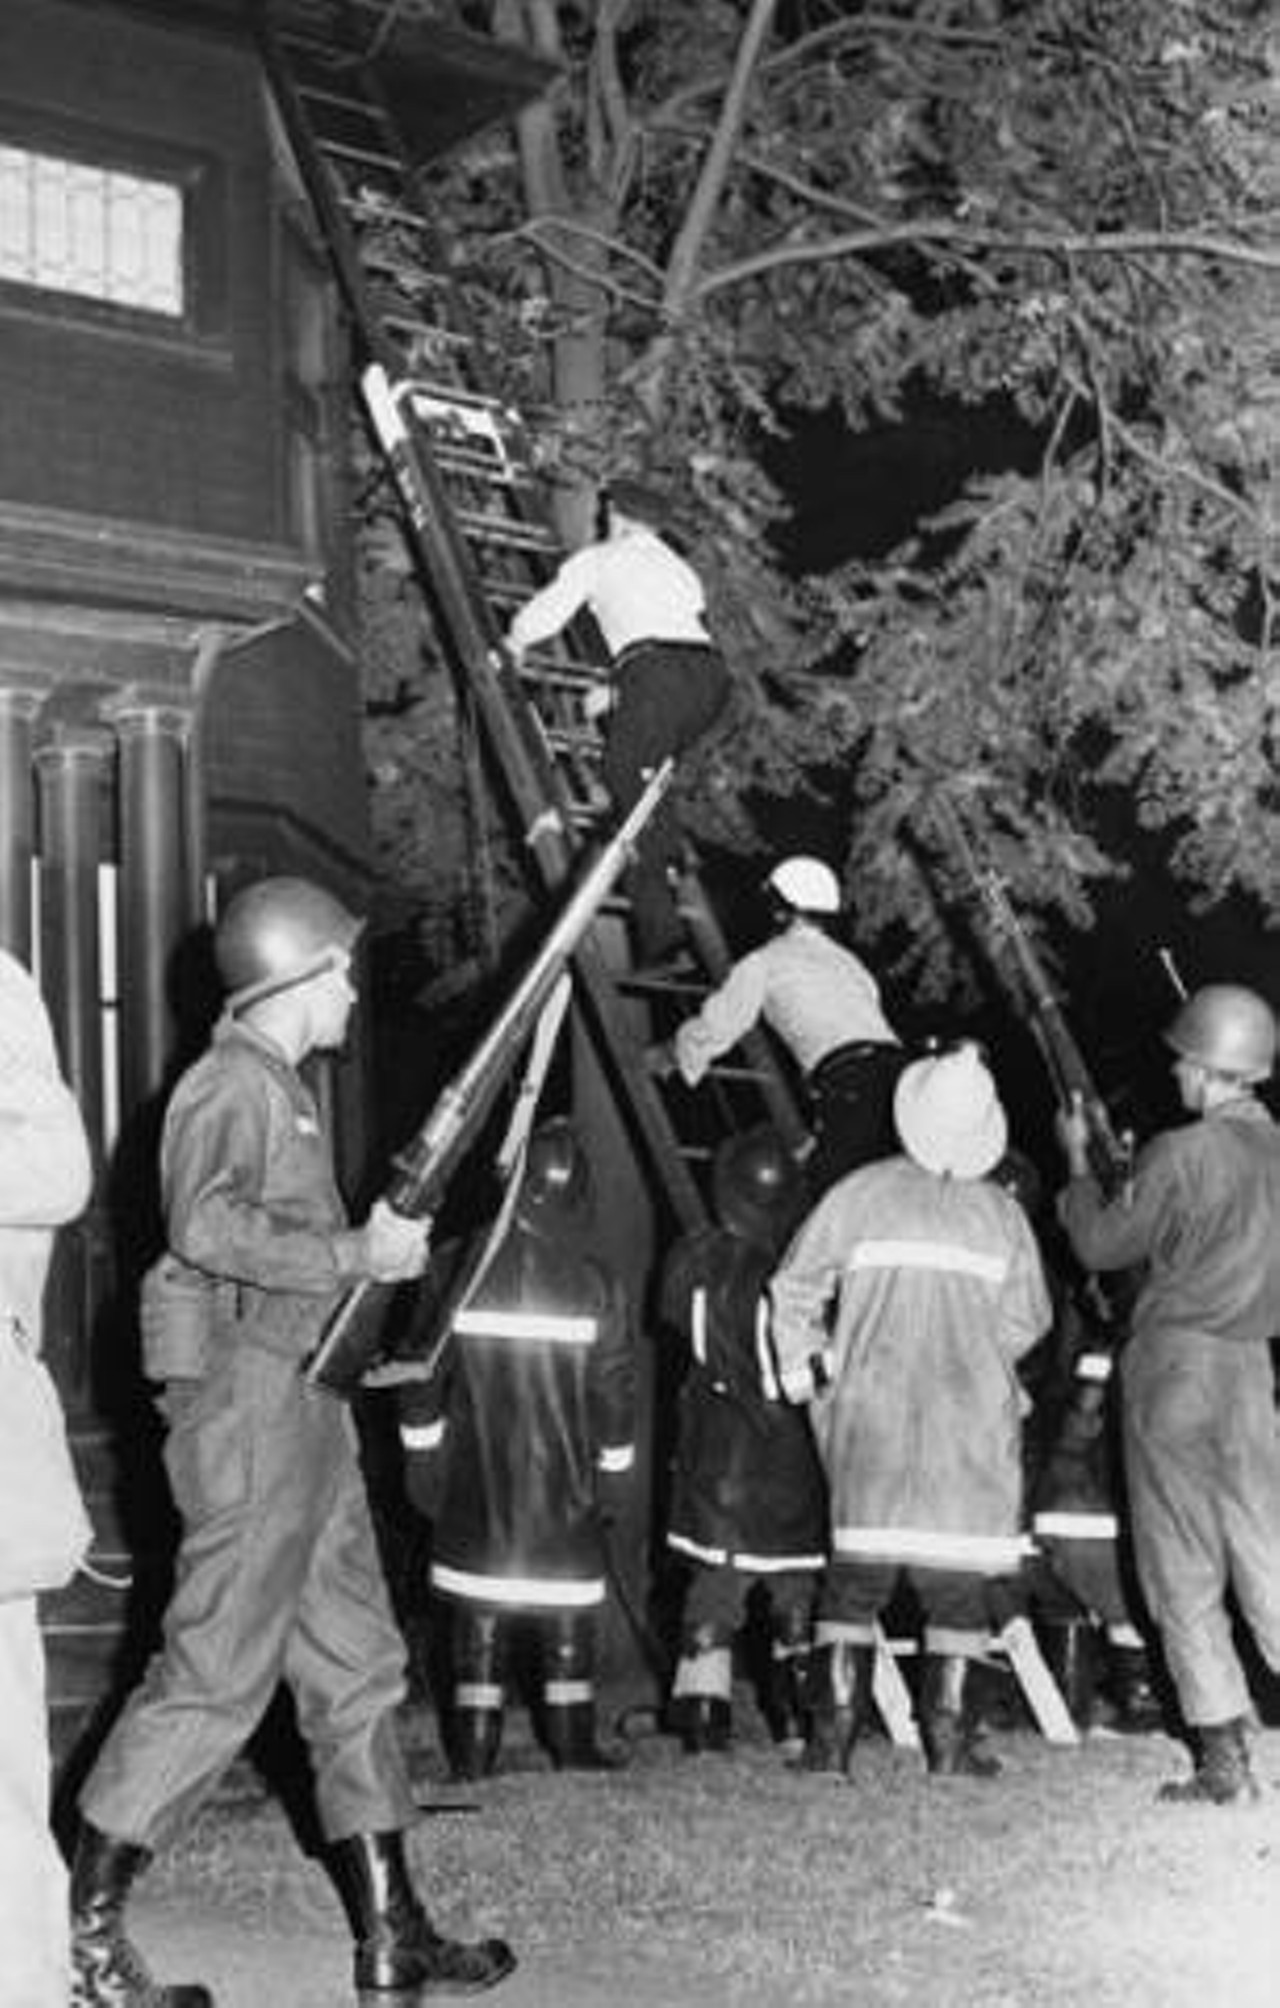 Cleveland firefighters watch as Cleveland police go up a ladder to investigate sniper activity during the 1966 Hough riots. Armed members of the Ohio Army National Guard are also on the scene.